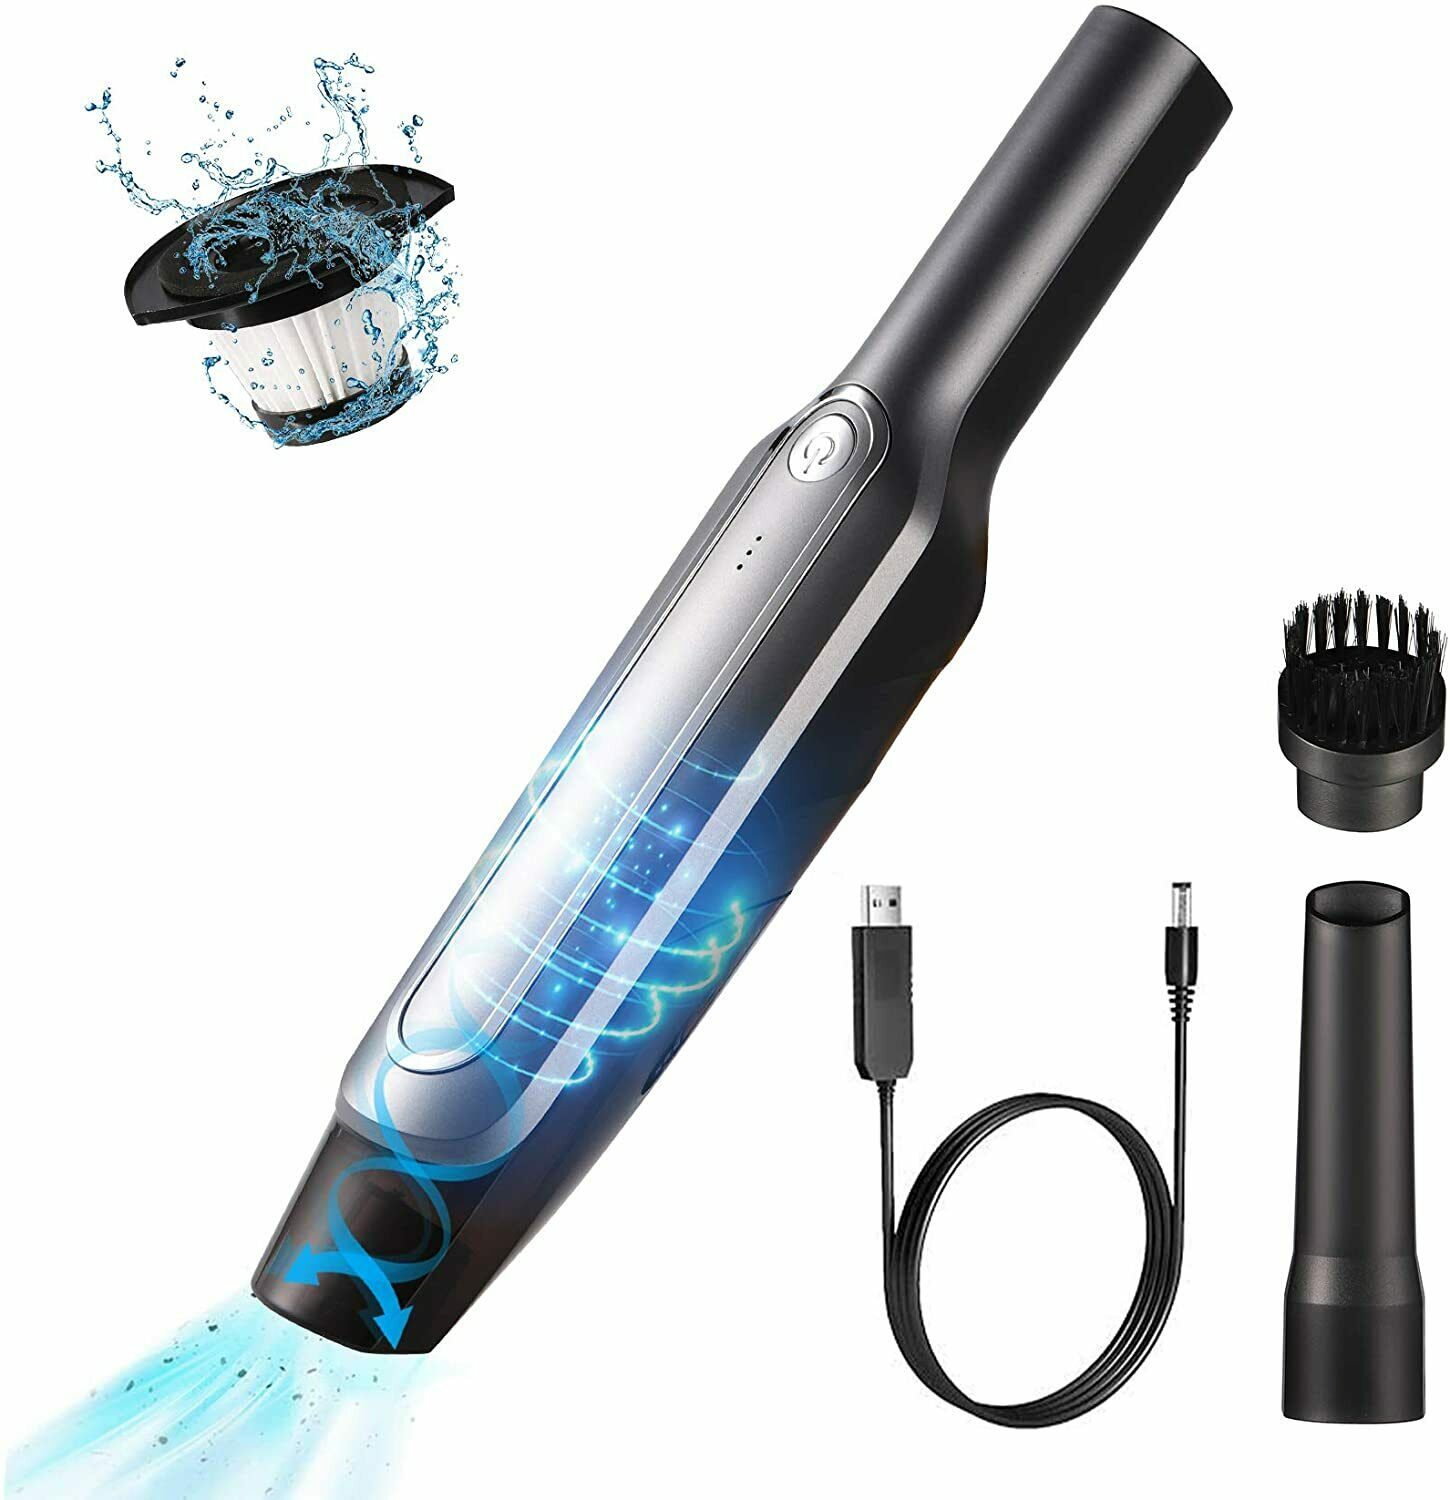 Car Vacuum Cleaner Cordless High Power Rechargeable Vacuum for Car and House